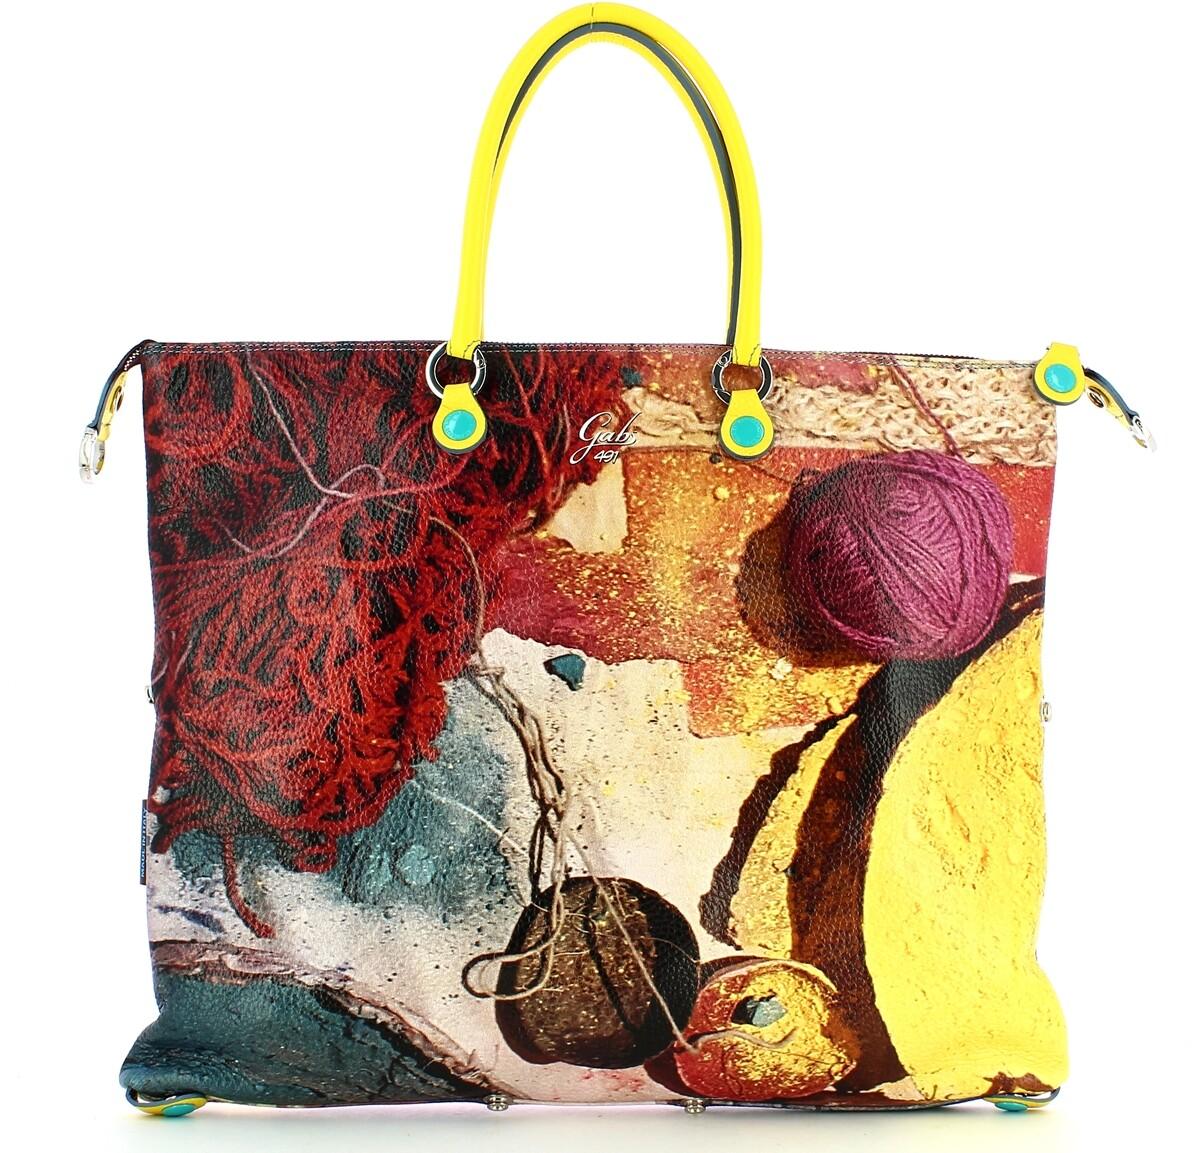 Gabs Wool All-Over Print G3 Super Large Tote Bag at FORZIERI